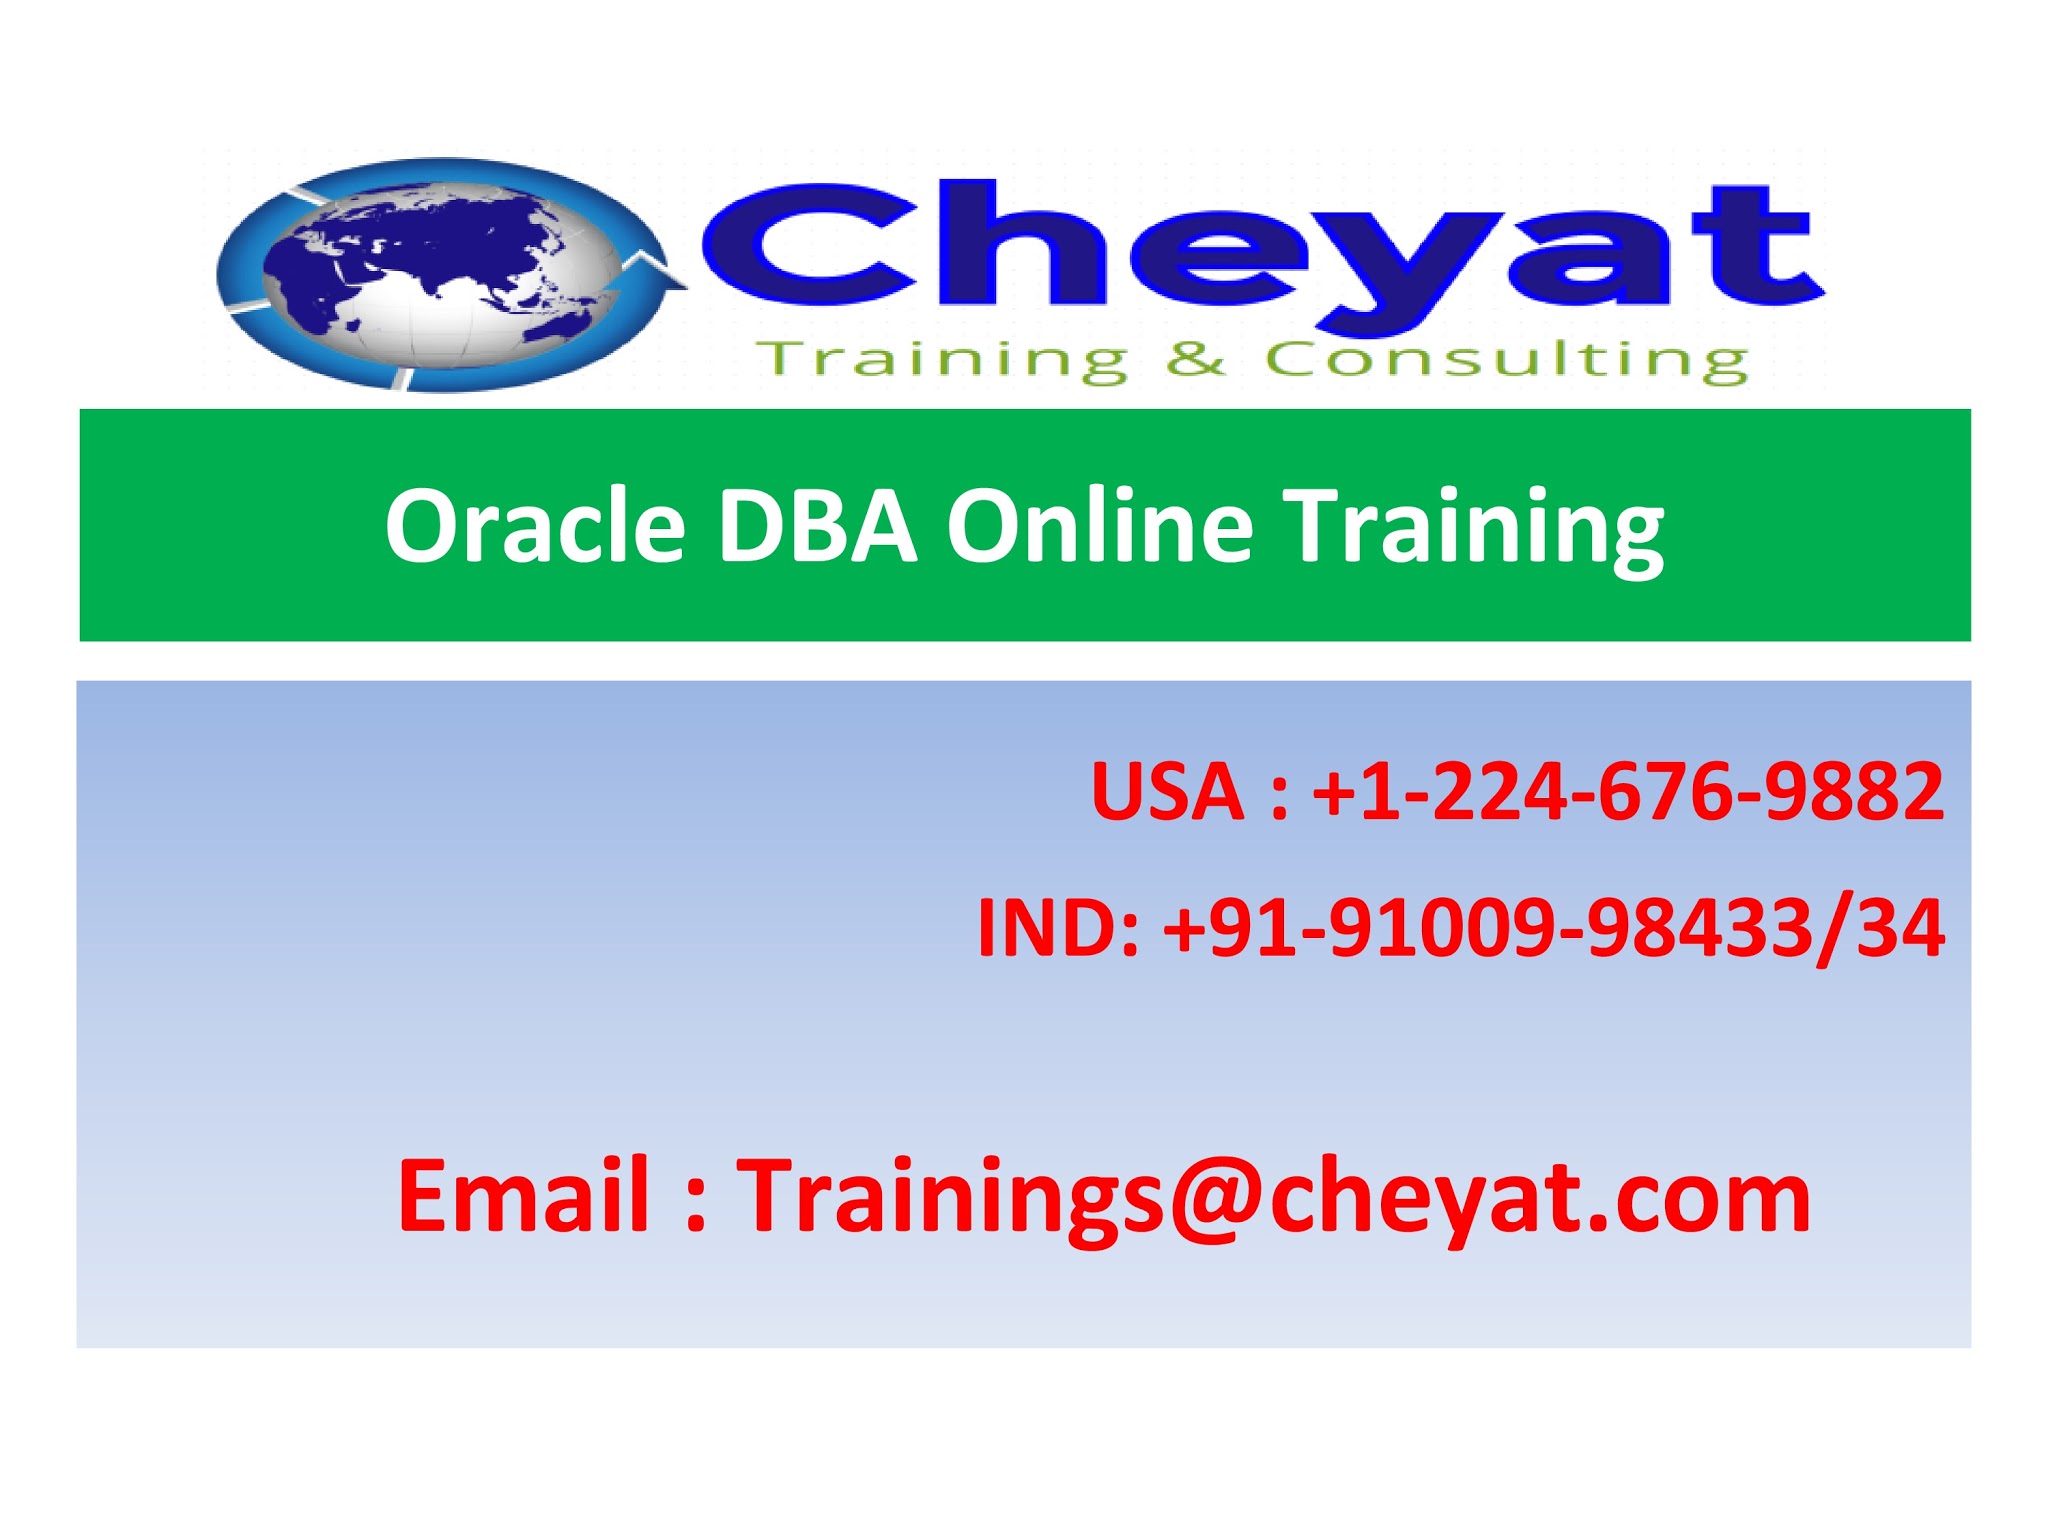 Oracle DBA Online TrainingEducation and LearningCoaching ClassesCentral DelhiChandni Chowk